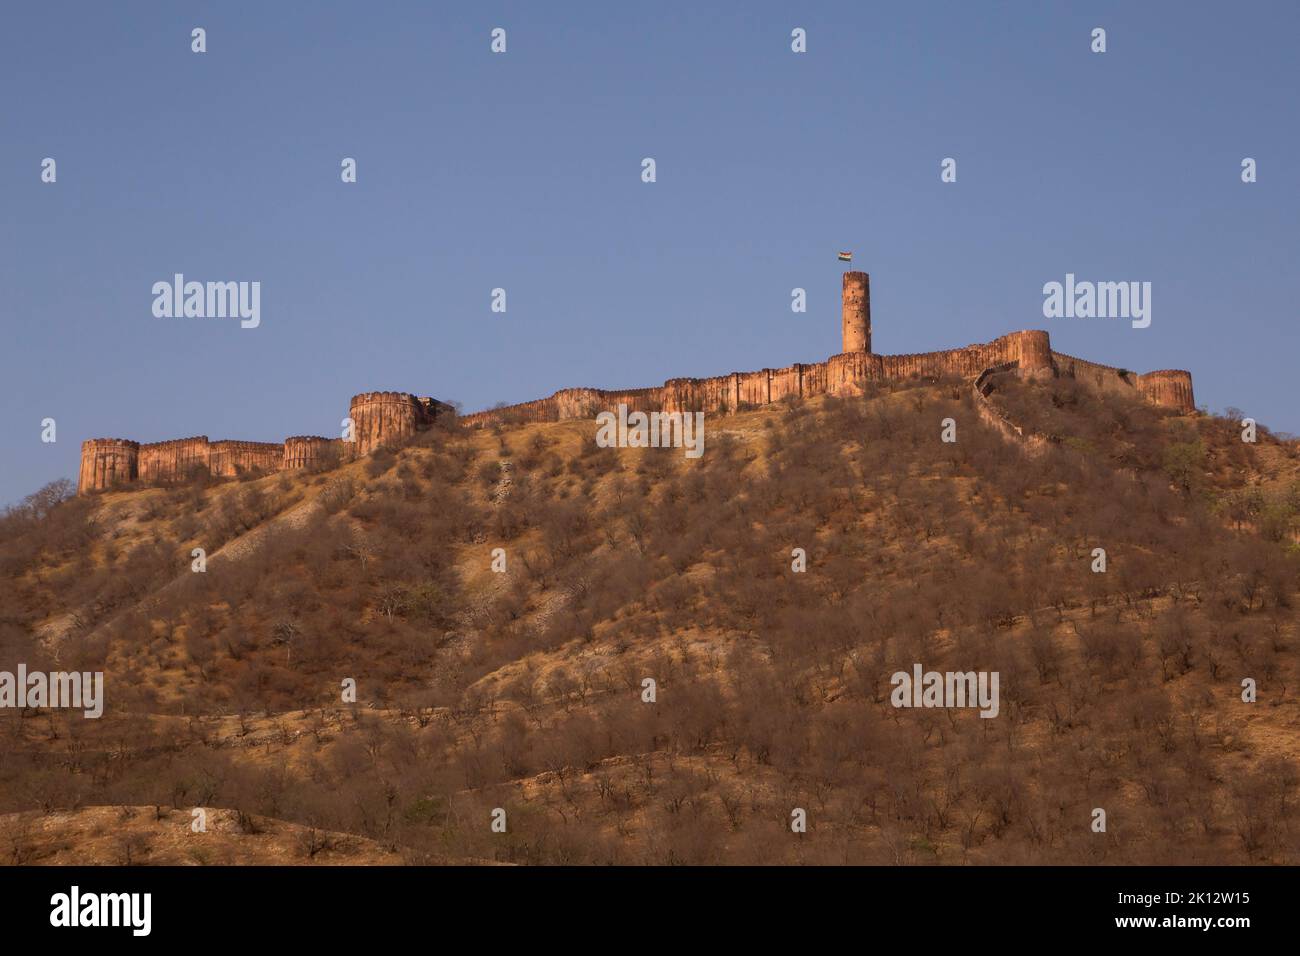 sight of Jaigarh Fort in Jaipur in India Stock Photo